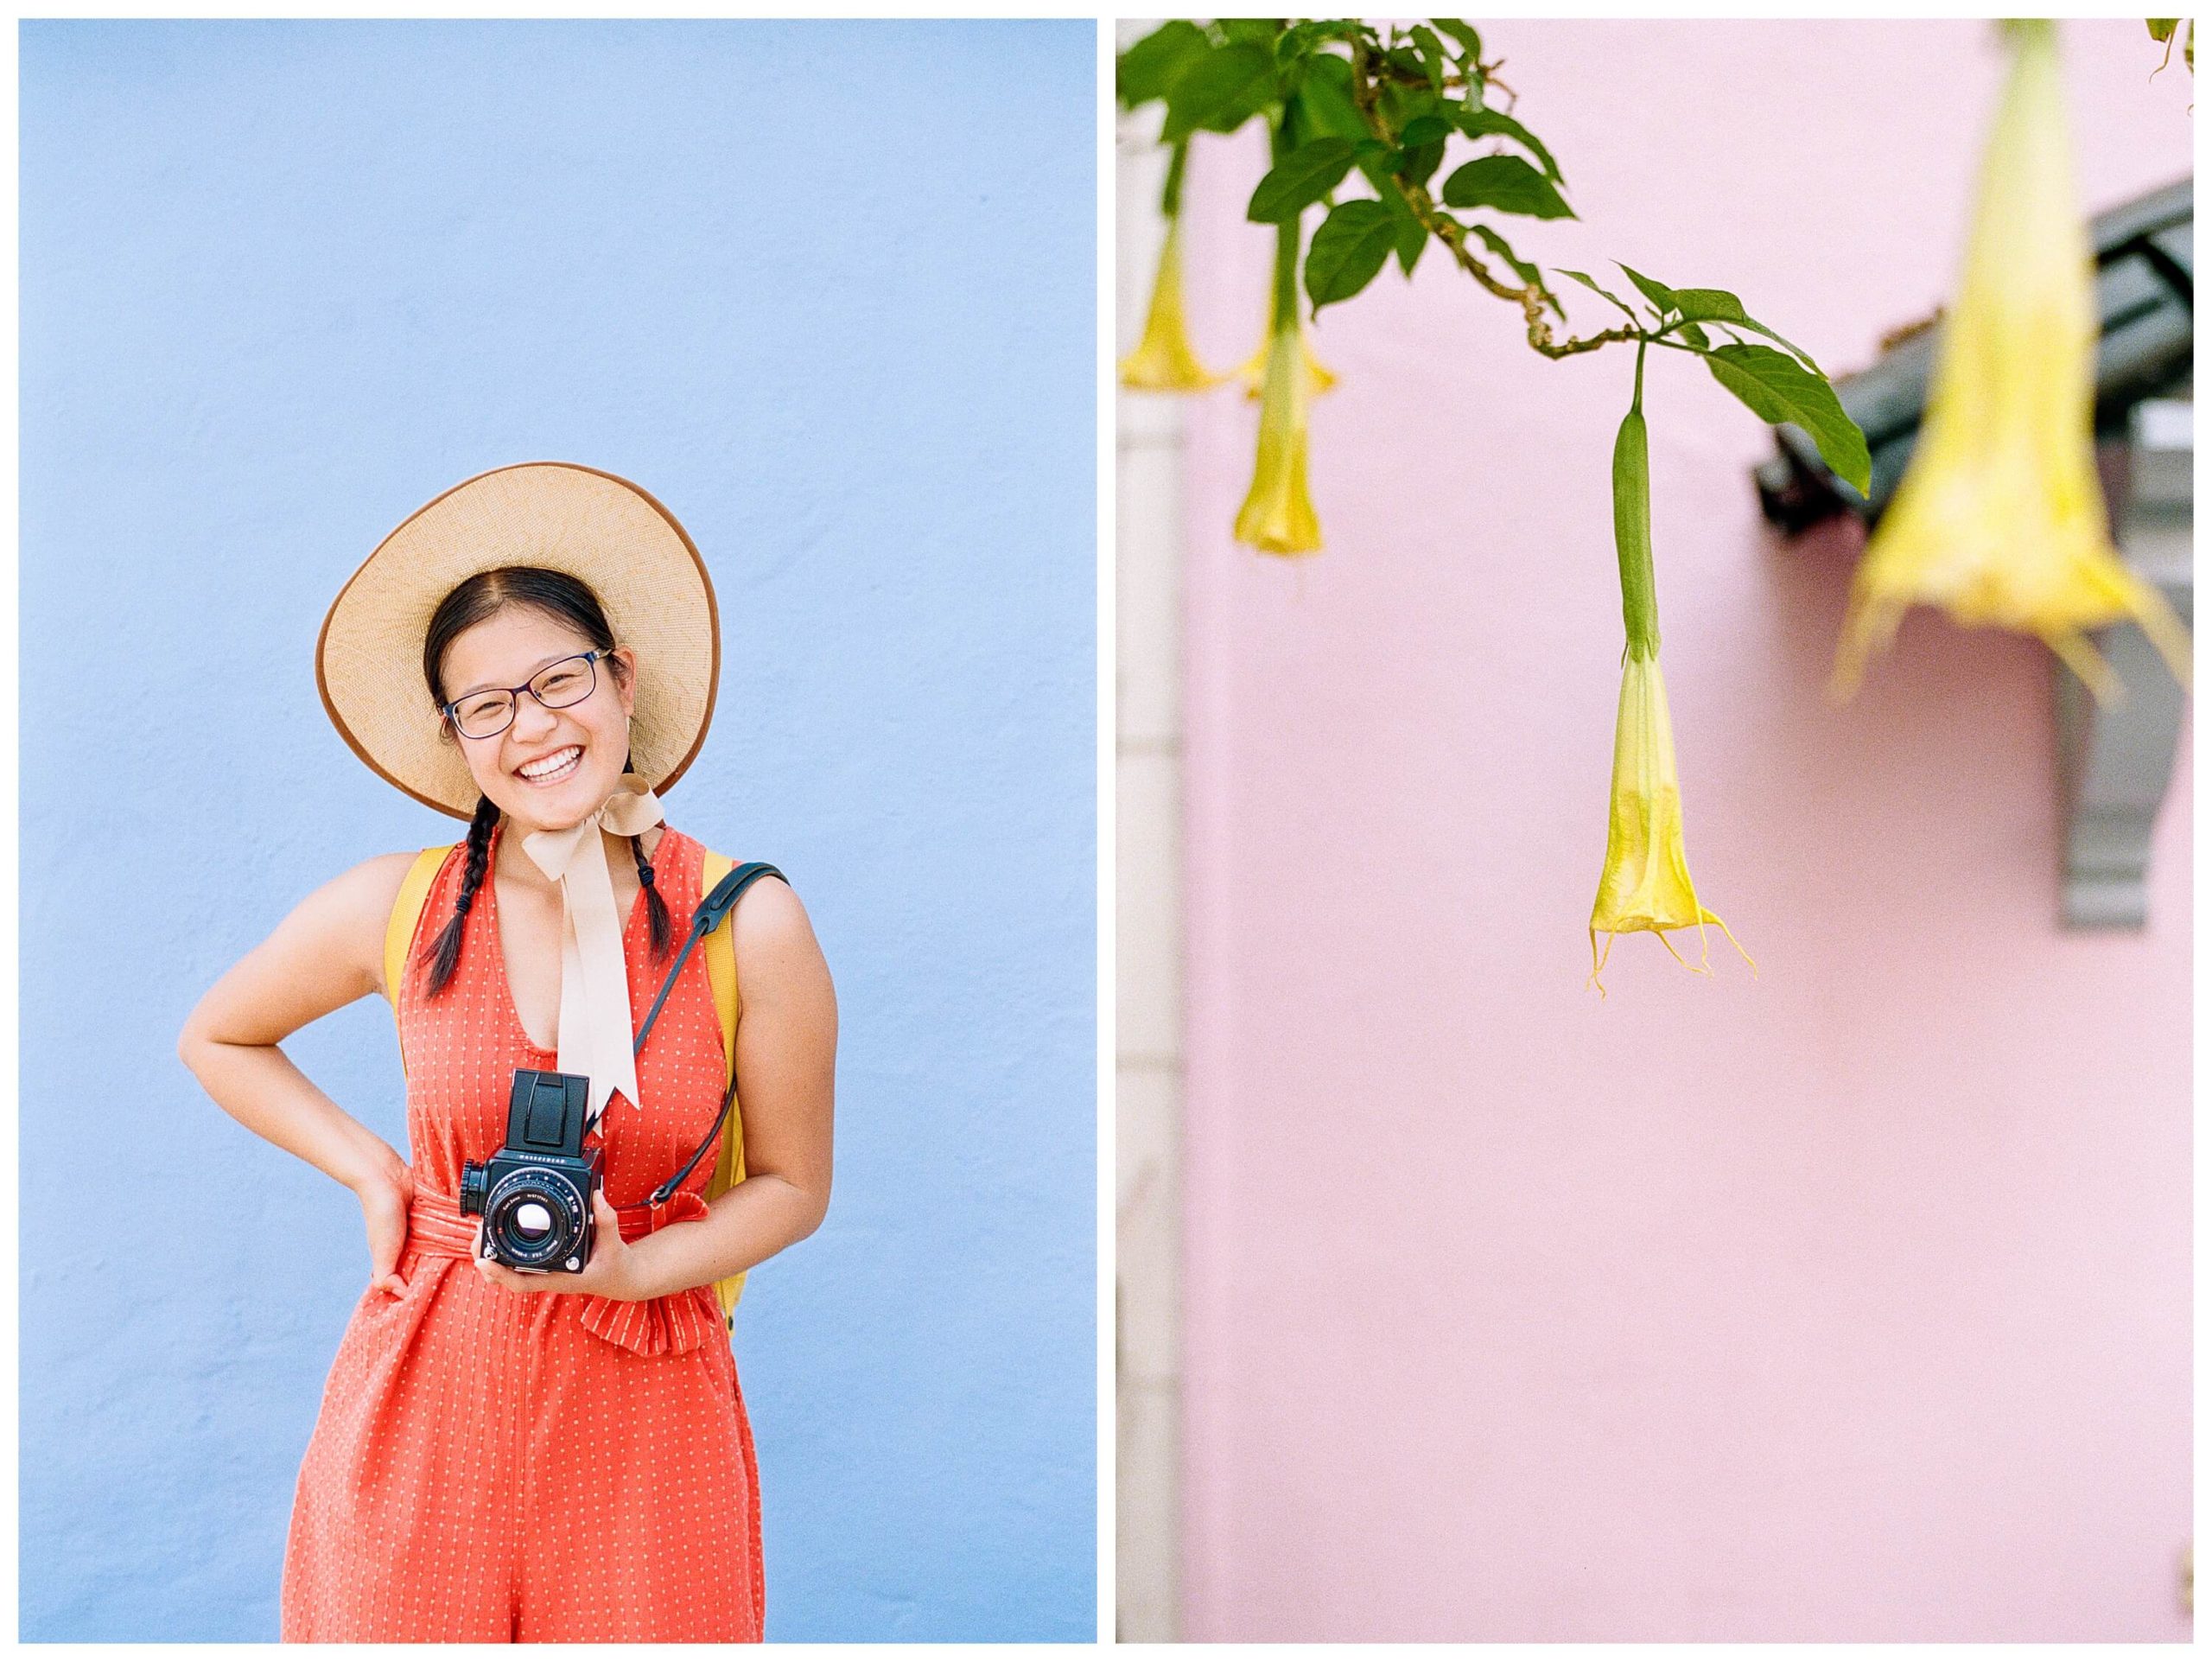 Left: A girl wearing a large sunhat and orange romper holds a Hasselblad film camera while standing in front of a blue wall. Right: A trio of yellow trumpet flowers droop lazily in front of a pink wall.